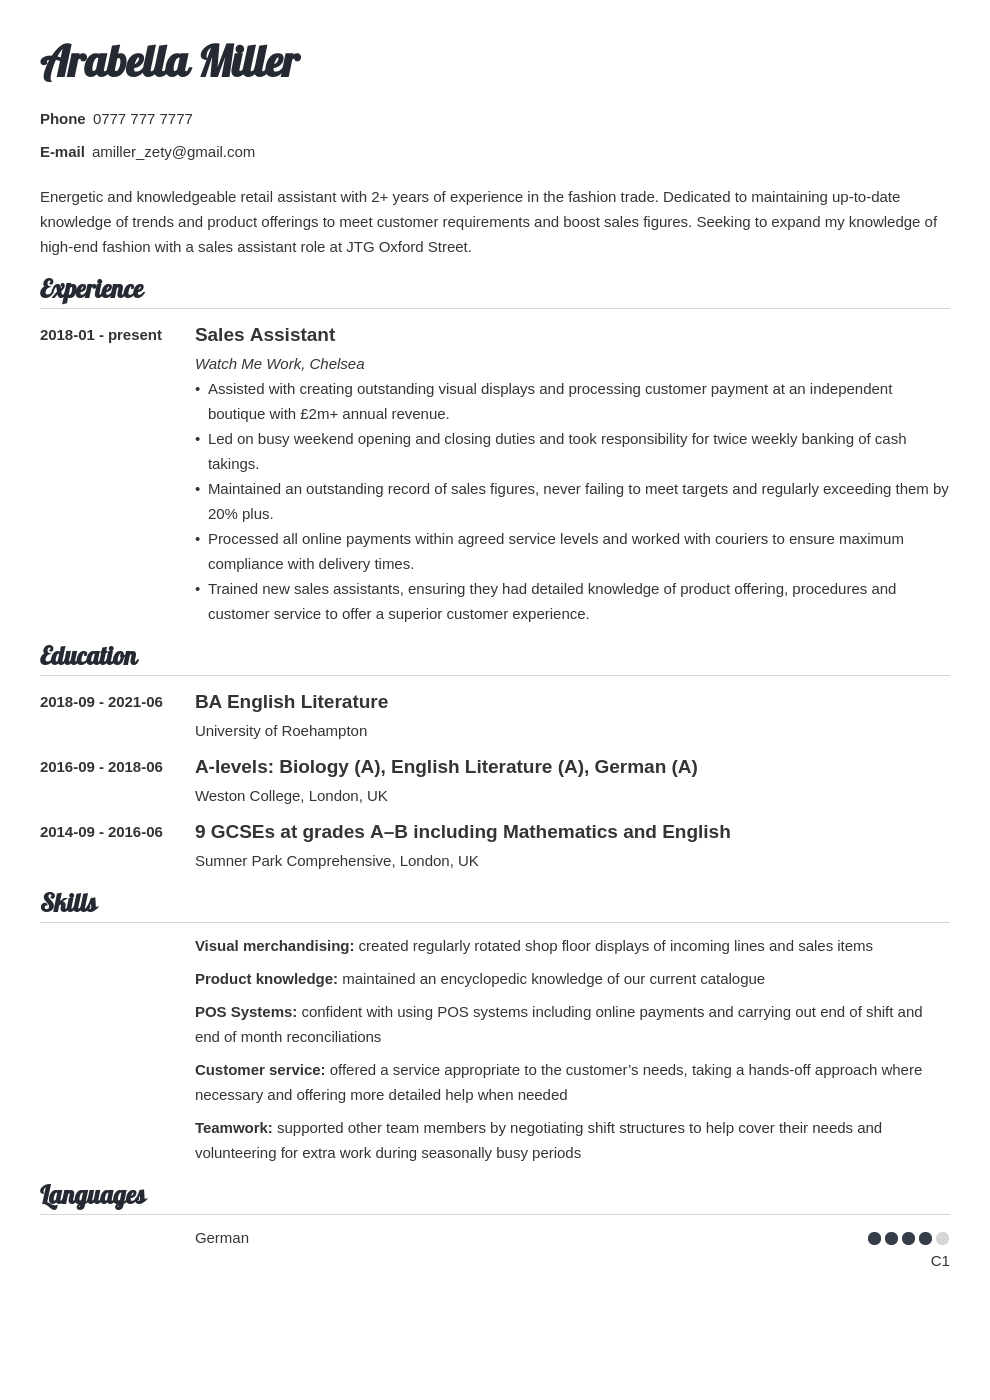 how to write a curriculum vitae for education